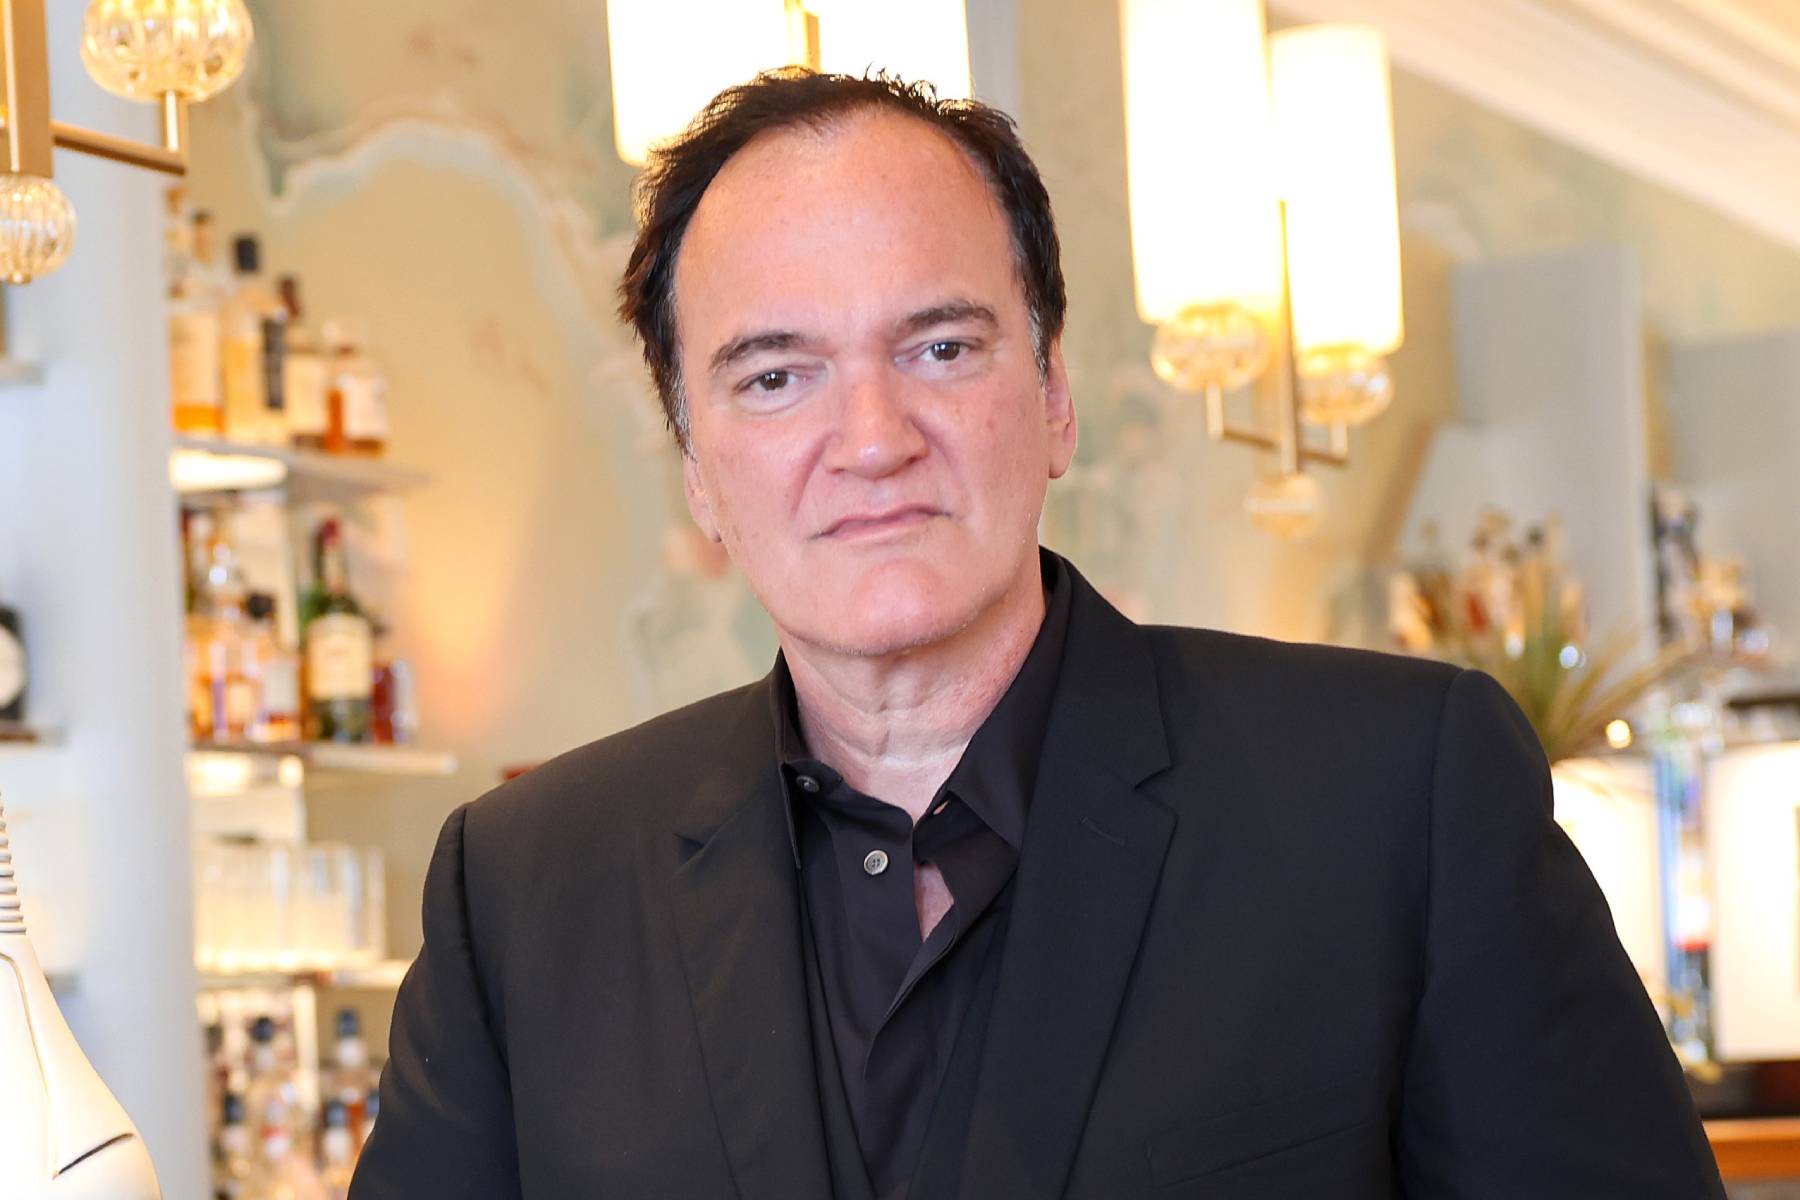 Quentin Tarantino Scraps Film ‘The Movie Critic,’ Which Would’ve Been His Last